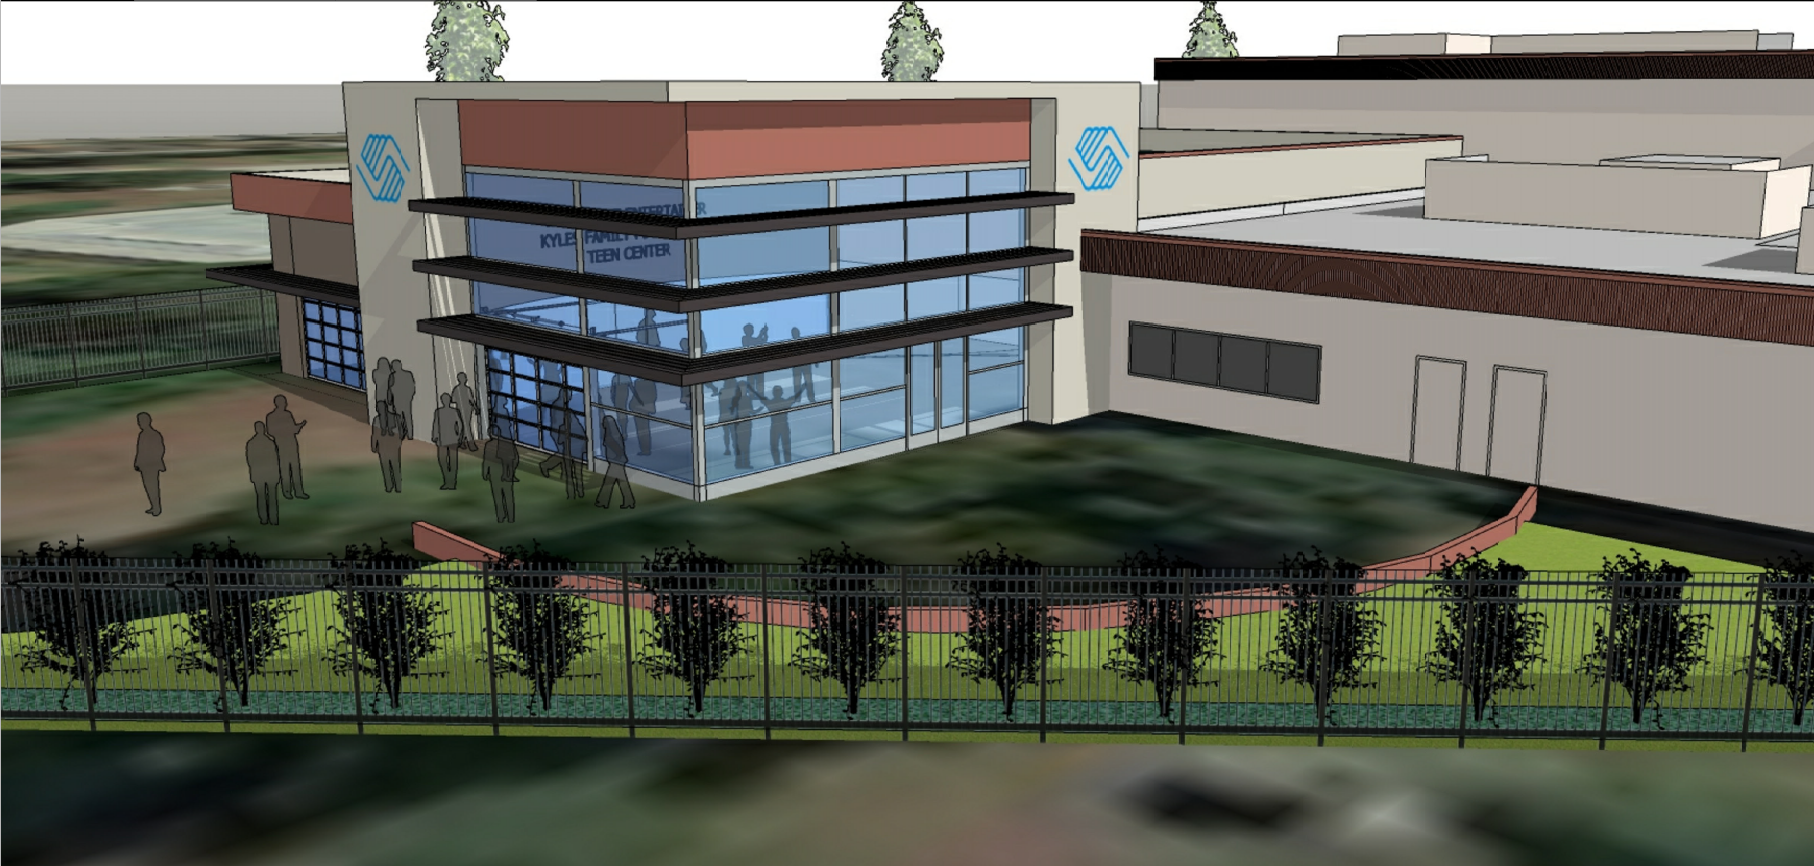 Boys and Girls Club Addition Rendering